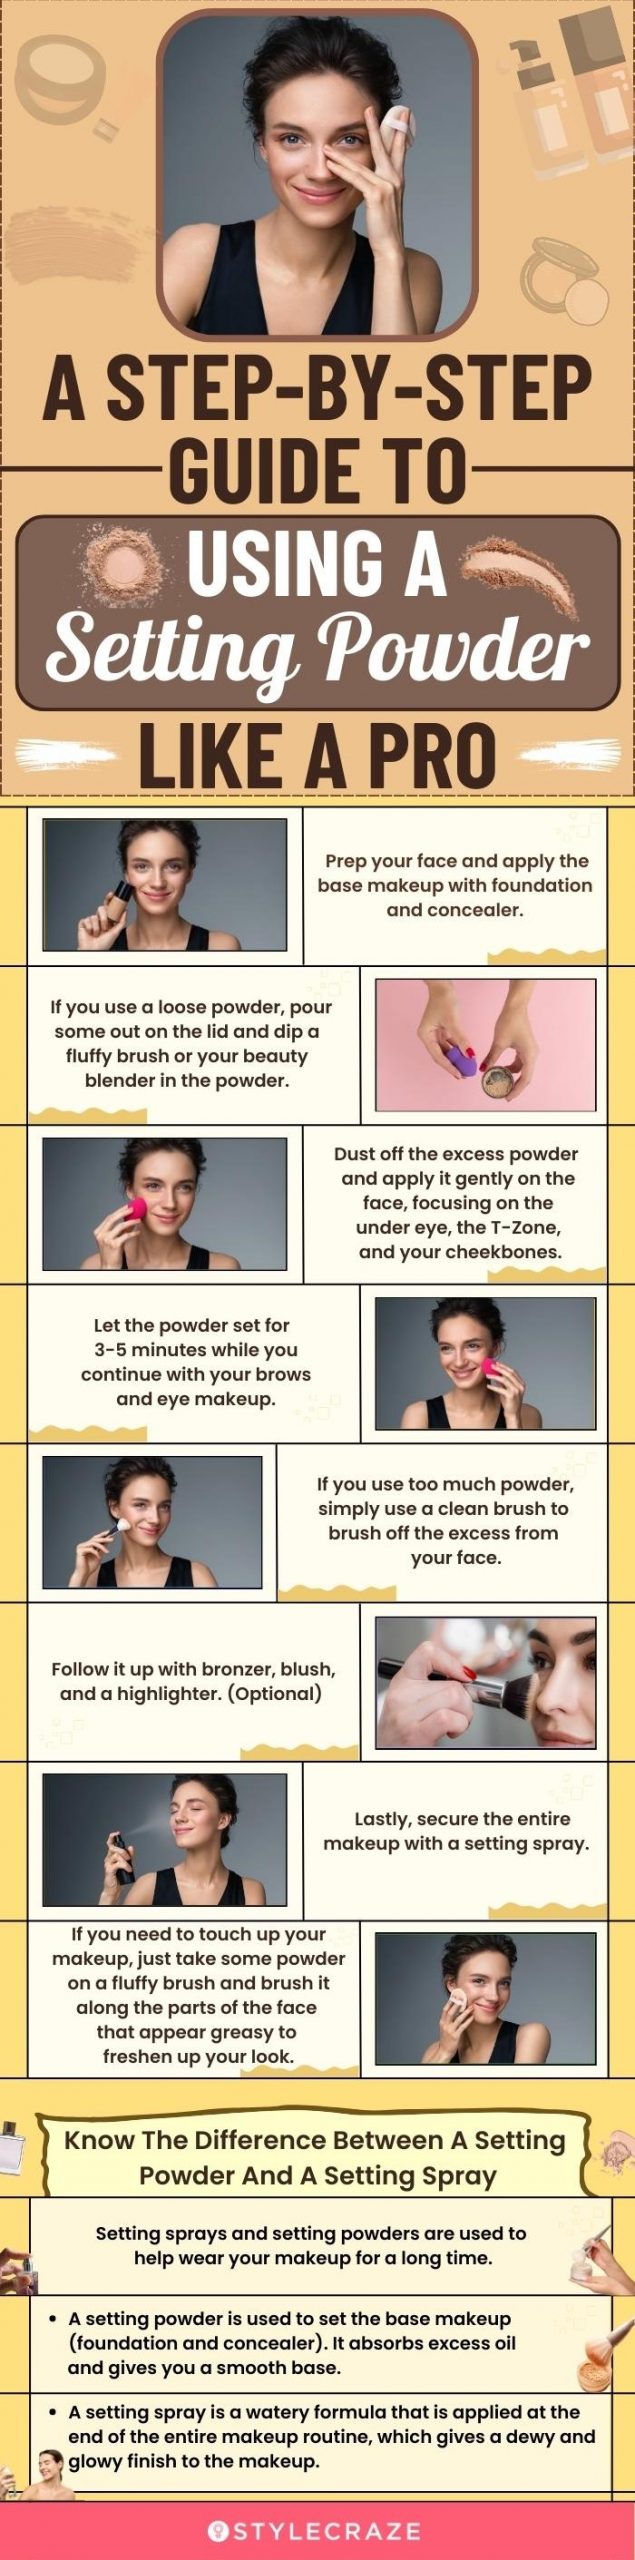 A Step-By-Step Guide To Using A Setting Powder Like A Pro (infographic)